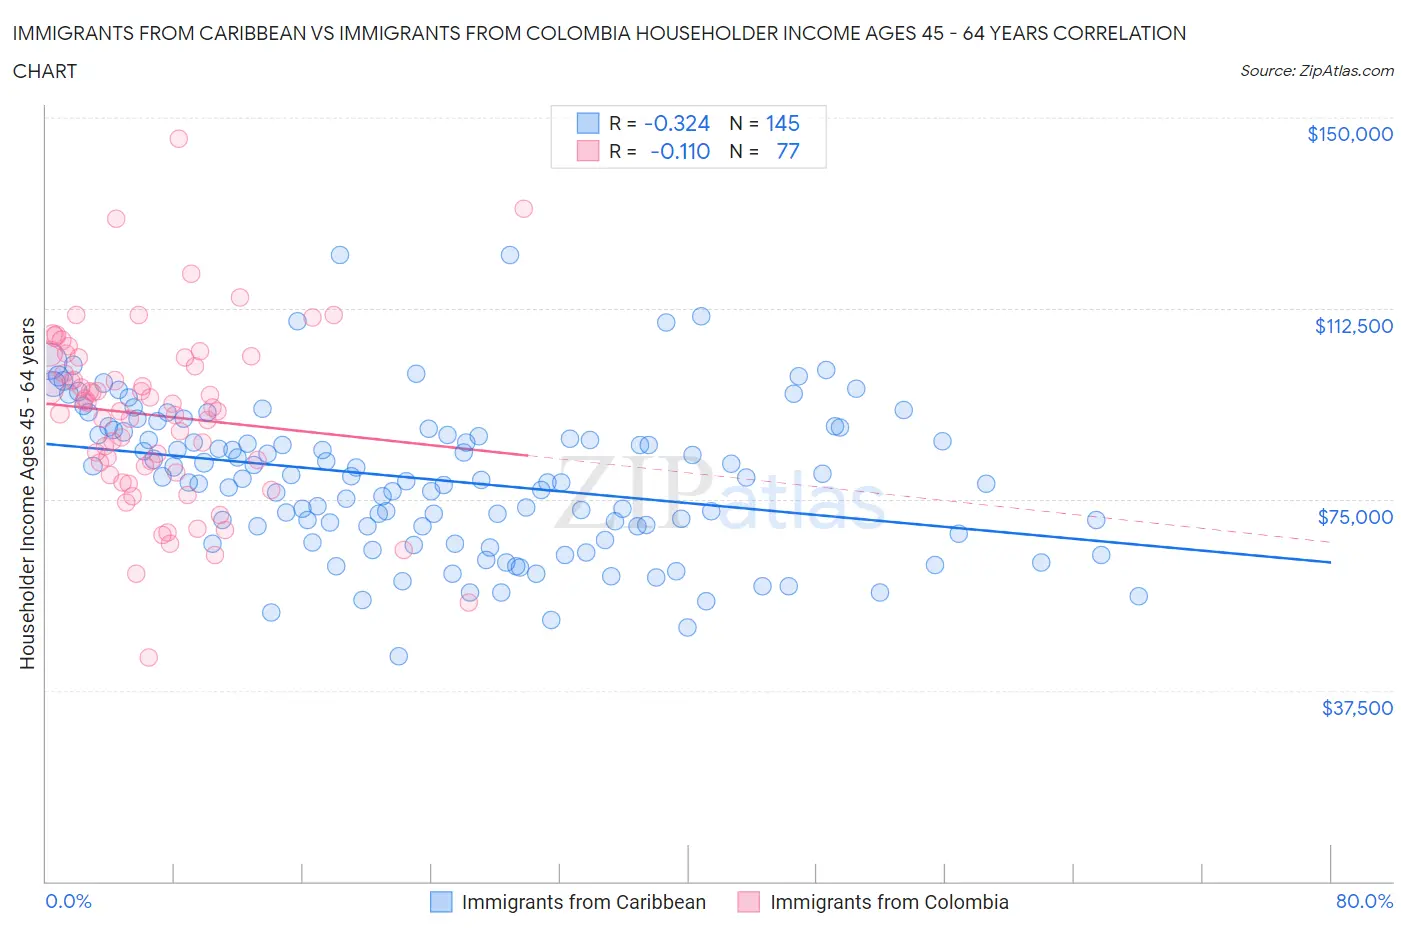 Immigrants from Caribbean vs Immigrants from Colombia Householder Income Ages 45 - 64 years